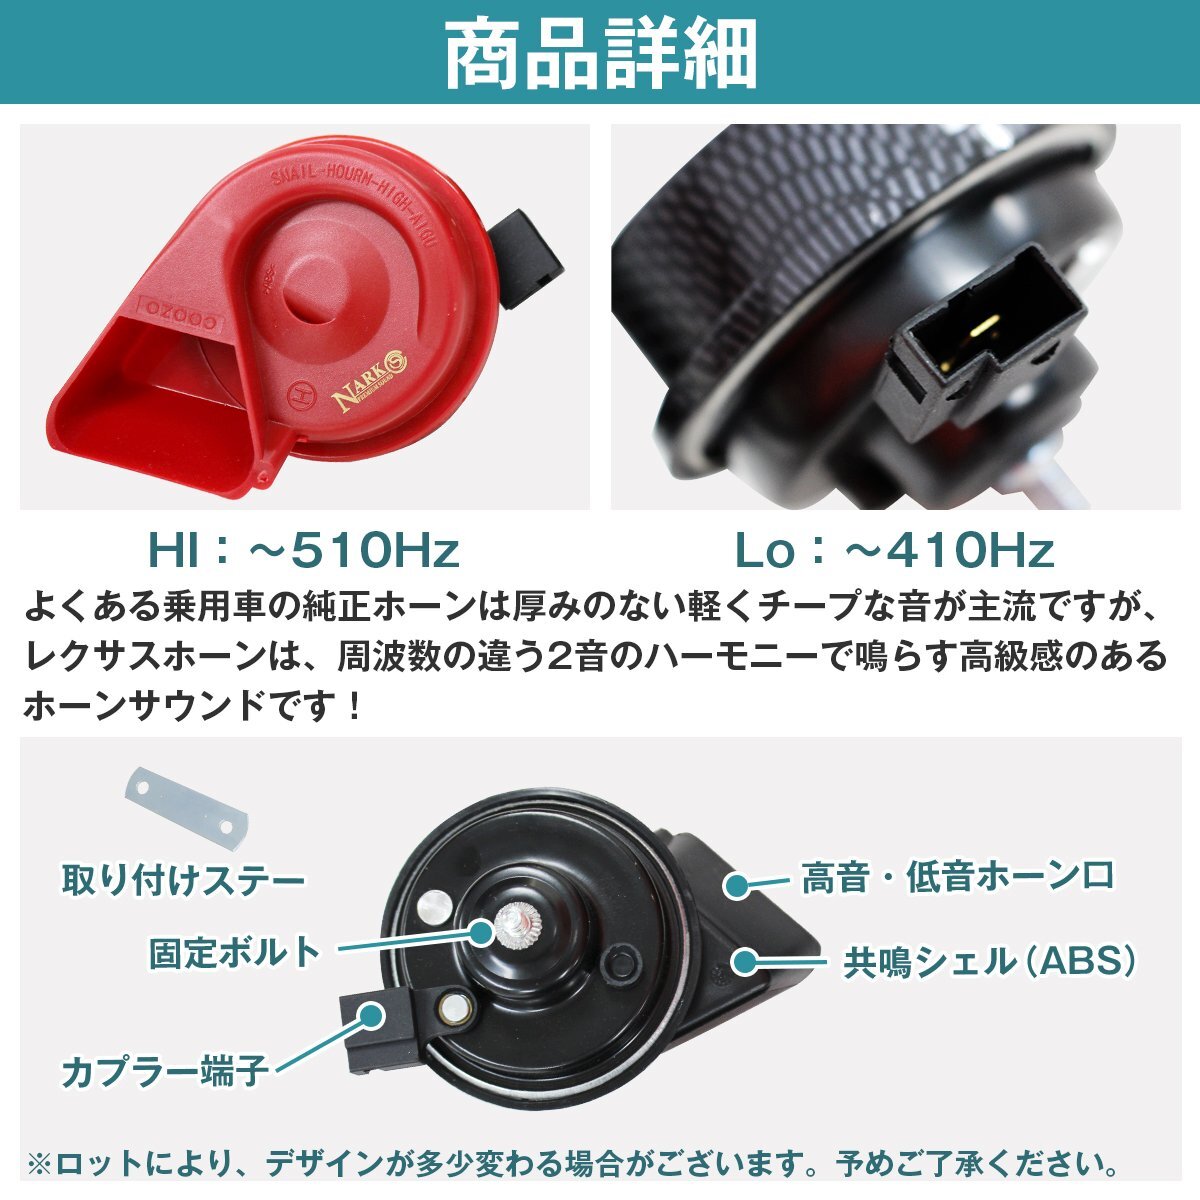 [ new goods immediate payment ] Daihatsu exclusive use coupler design Lexus sound horn height sound low sound 110db 2 piece set 12V Tanto Mira tough to Move red 